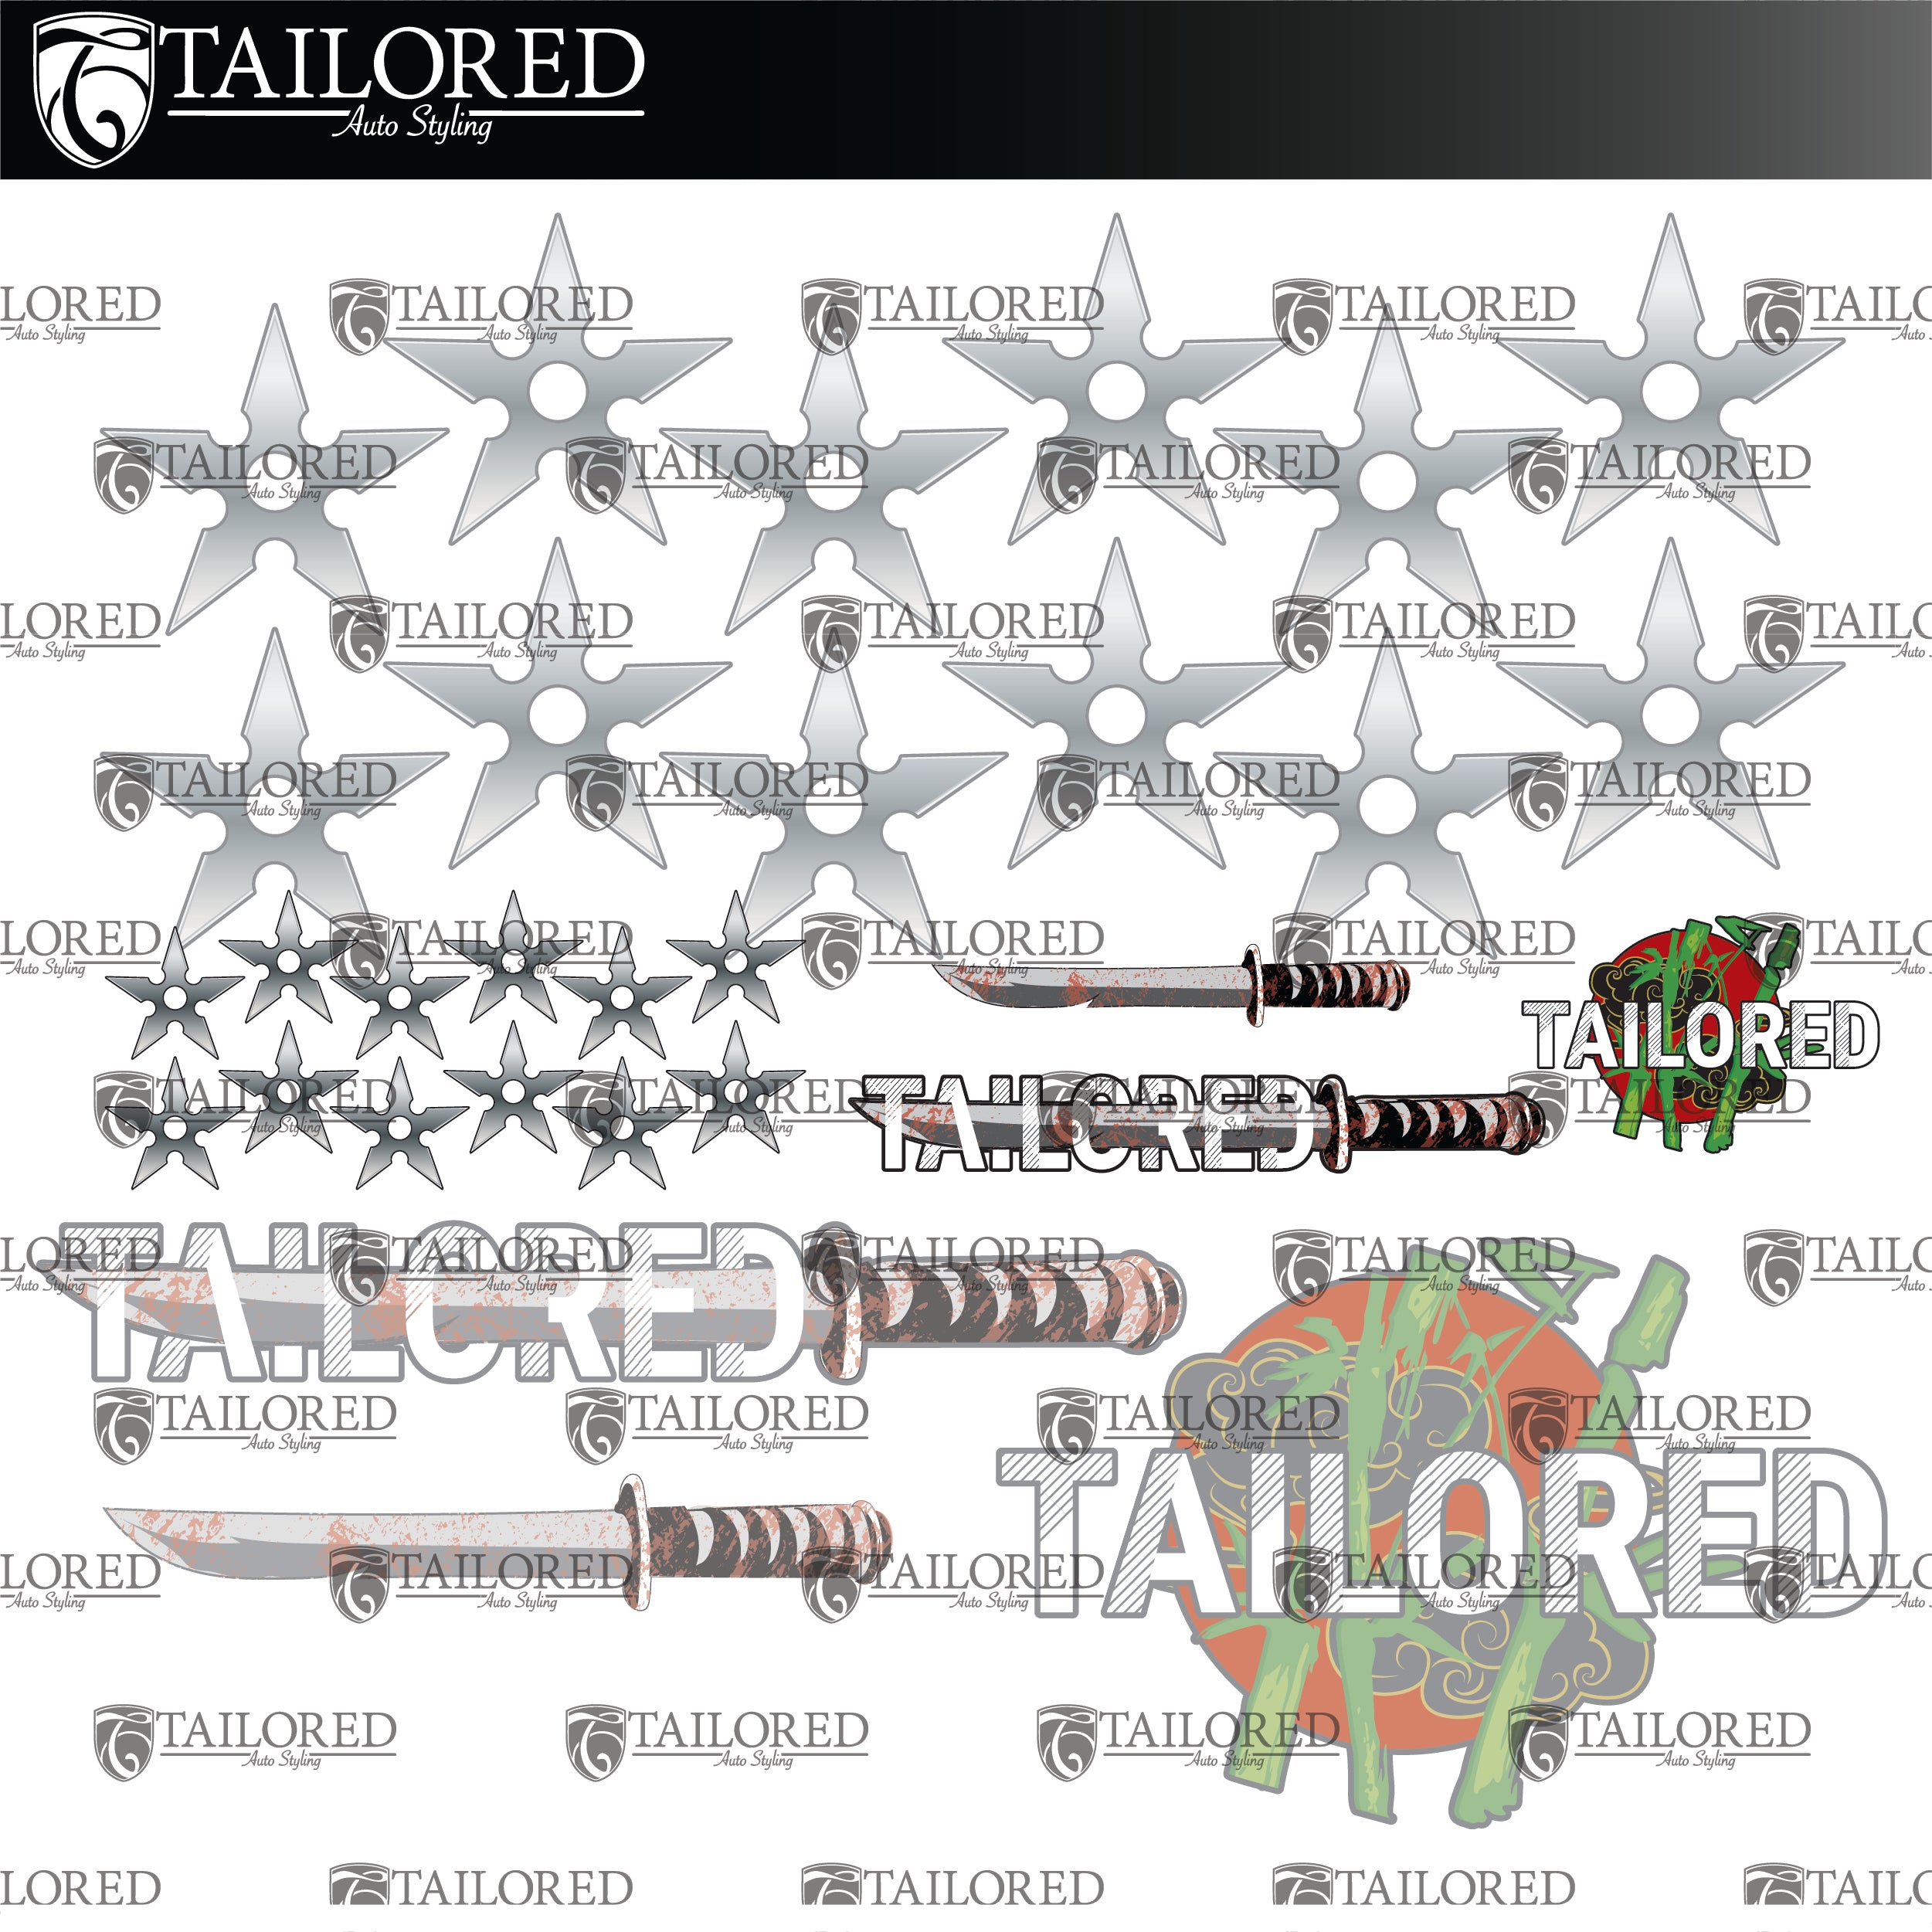 Black Tailored Bamboo V.2 Window Banner + Sticker Pack - Universal Fit